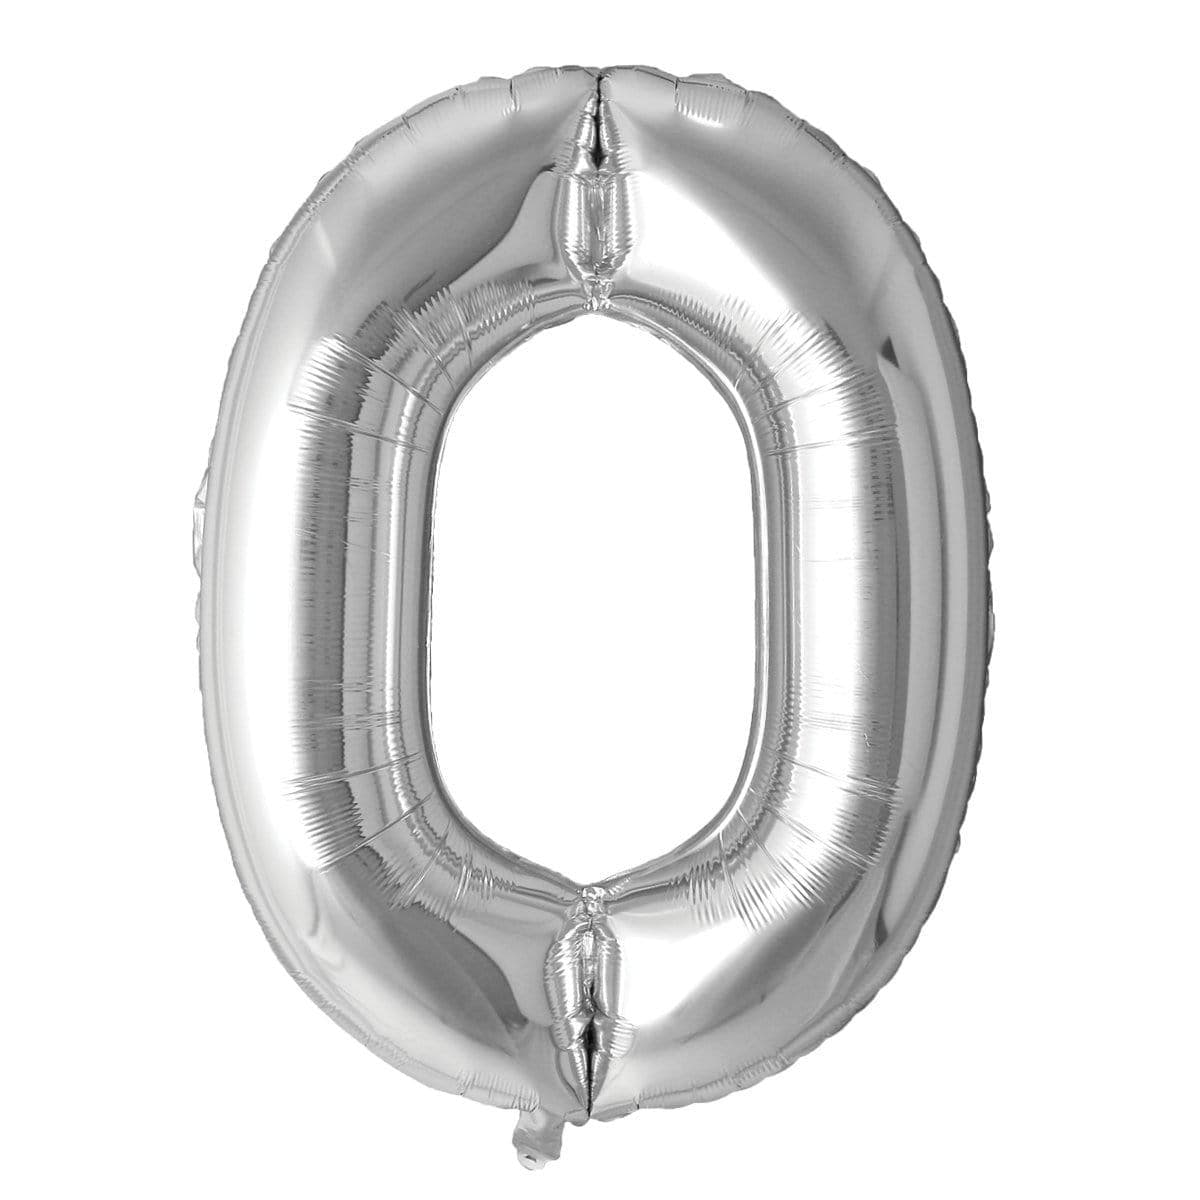 Buy Balloons Silver Letter O Foil Balloon, 34 Inches sold at Party Expert